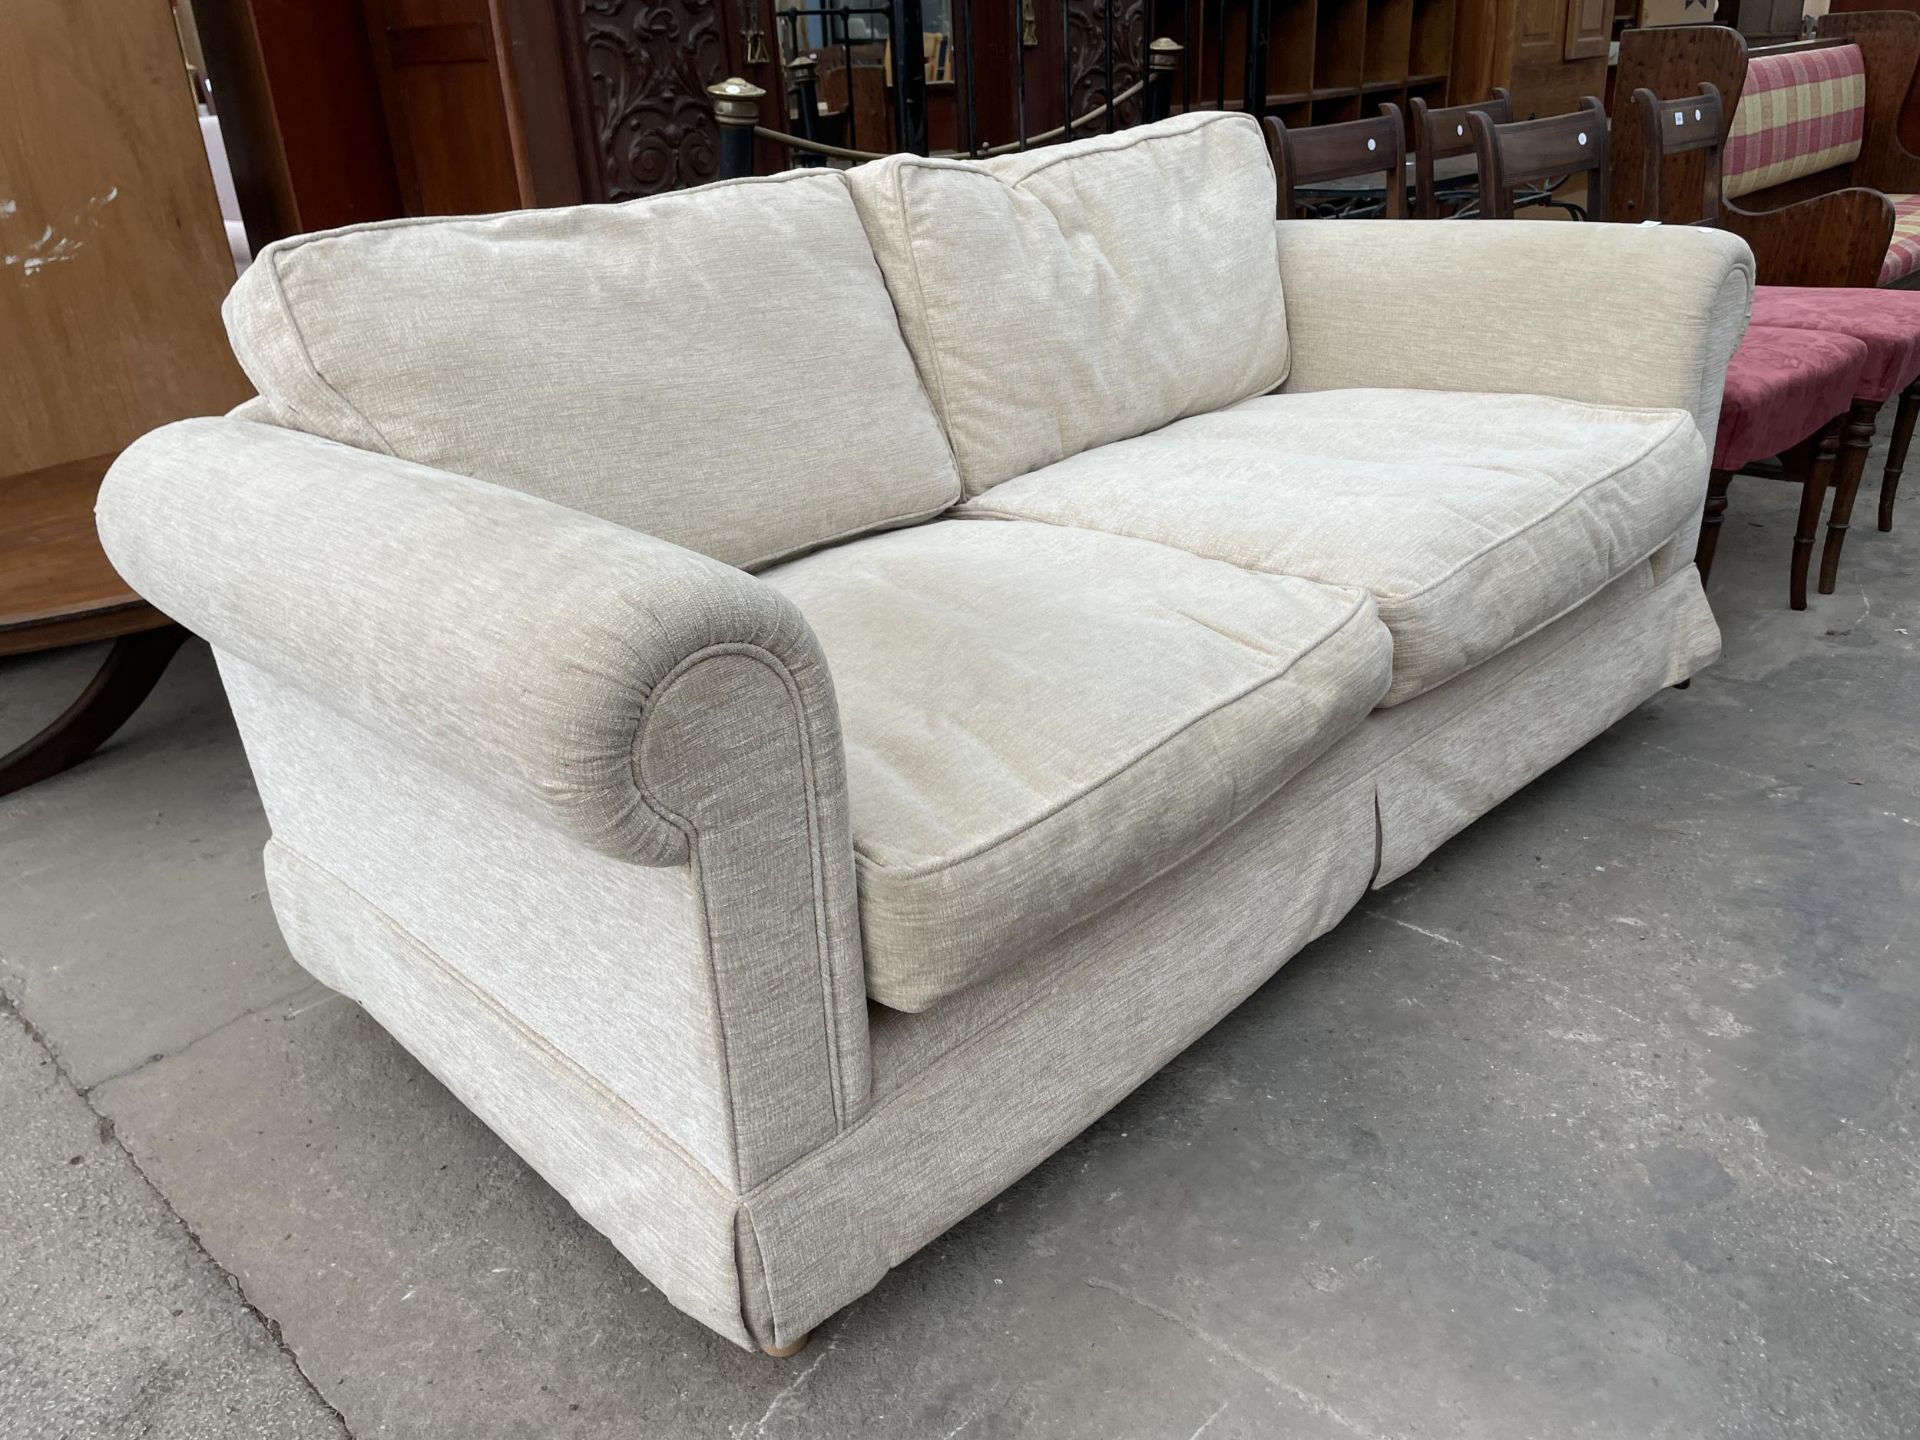 A MODERN BEIGE TWO SEATER SETTEE - Image 2 of 3